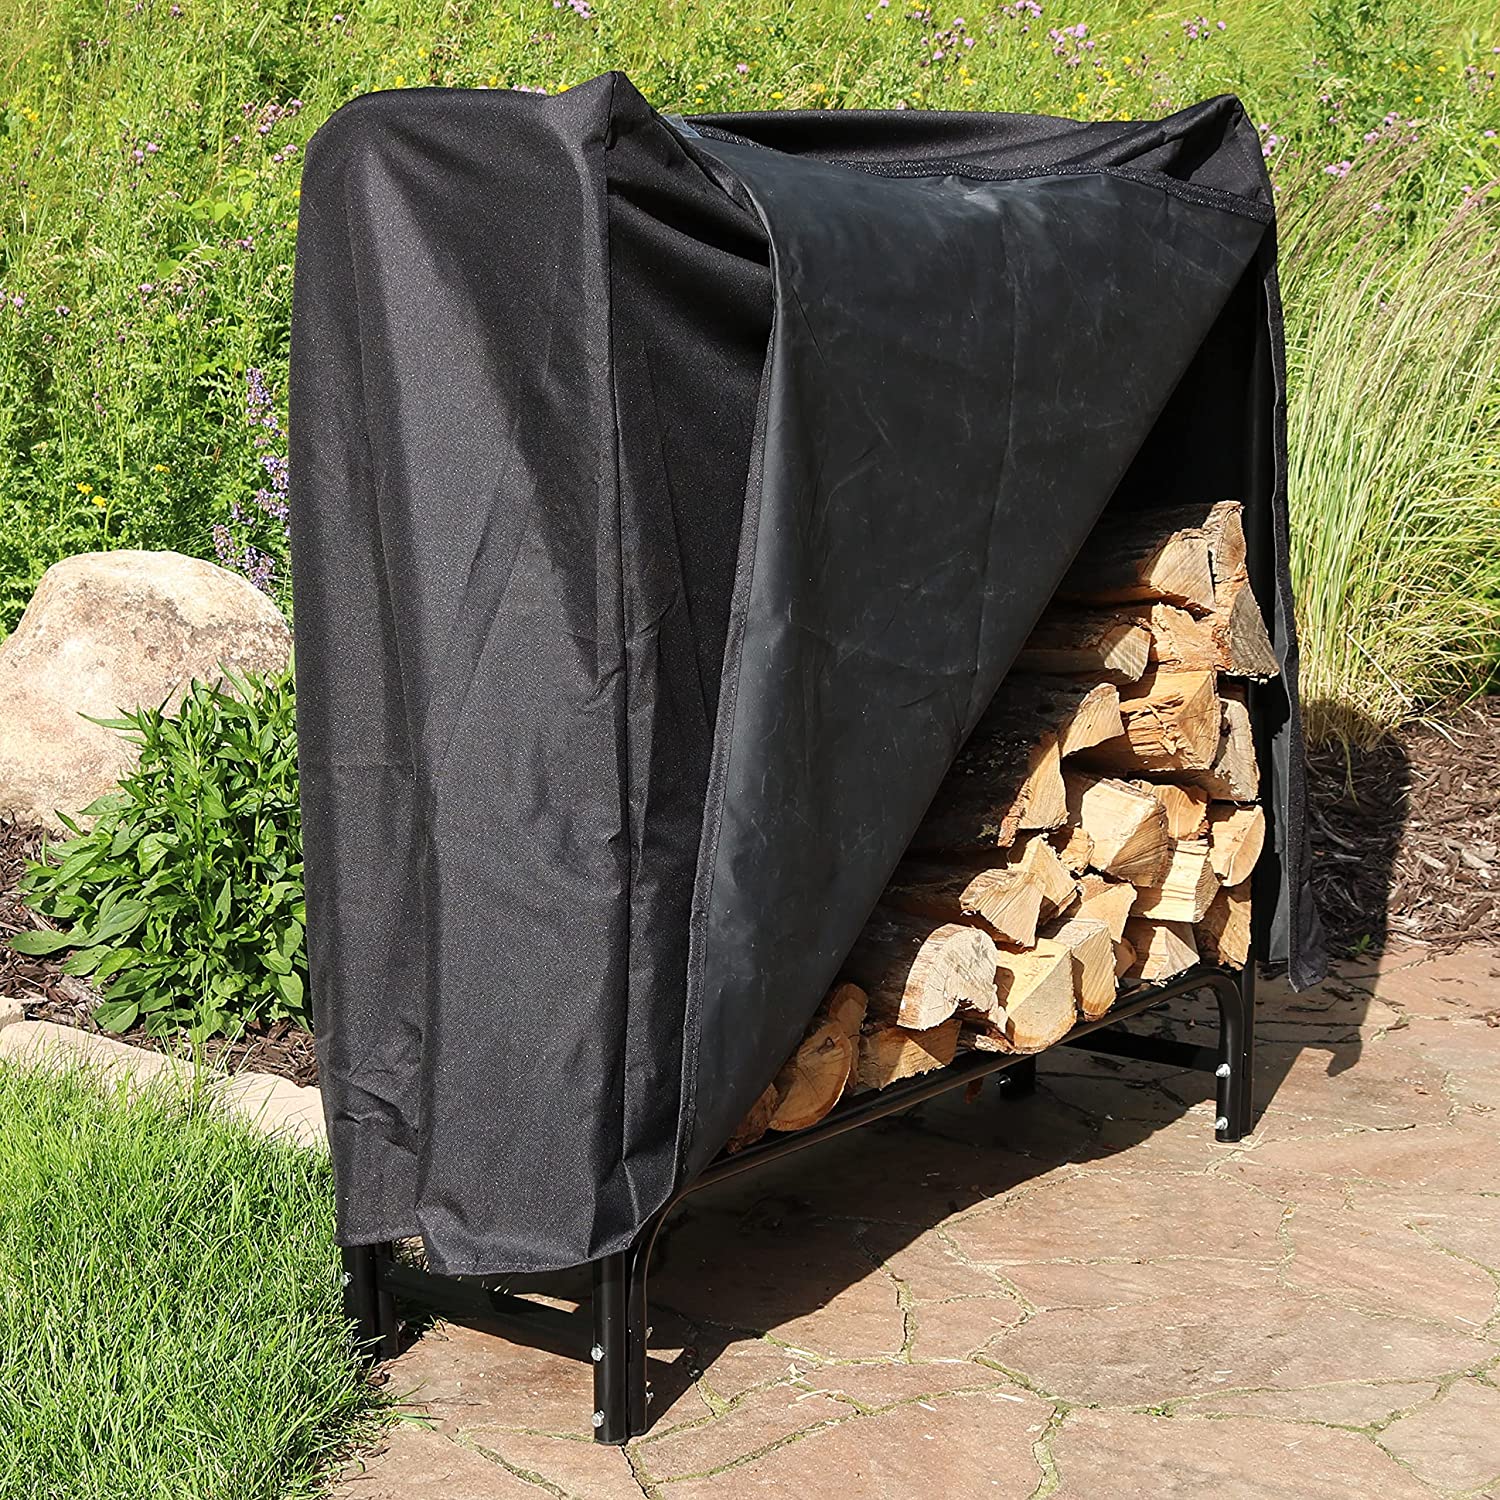 Outdoor Firewood Log Rack and Cover Set - 4-Foot Powder-Coated Steel Lumber Storage System with Durable Weather-Resistant Protective Black PVC Top - image 3 of 9